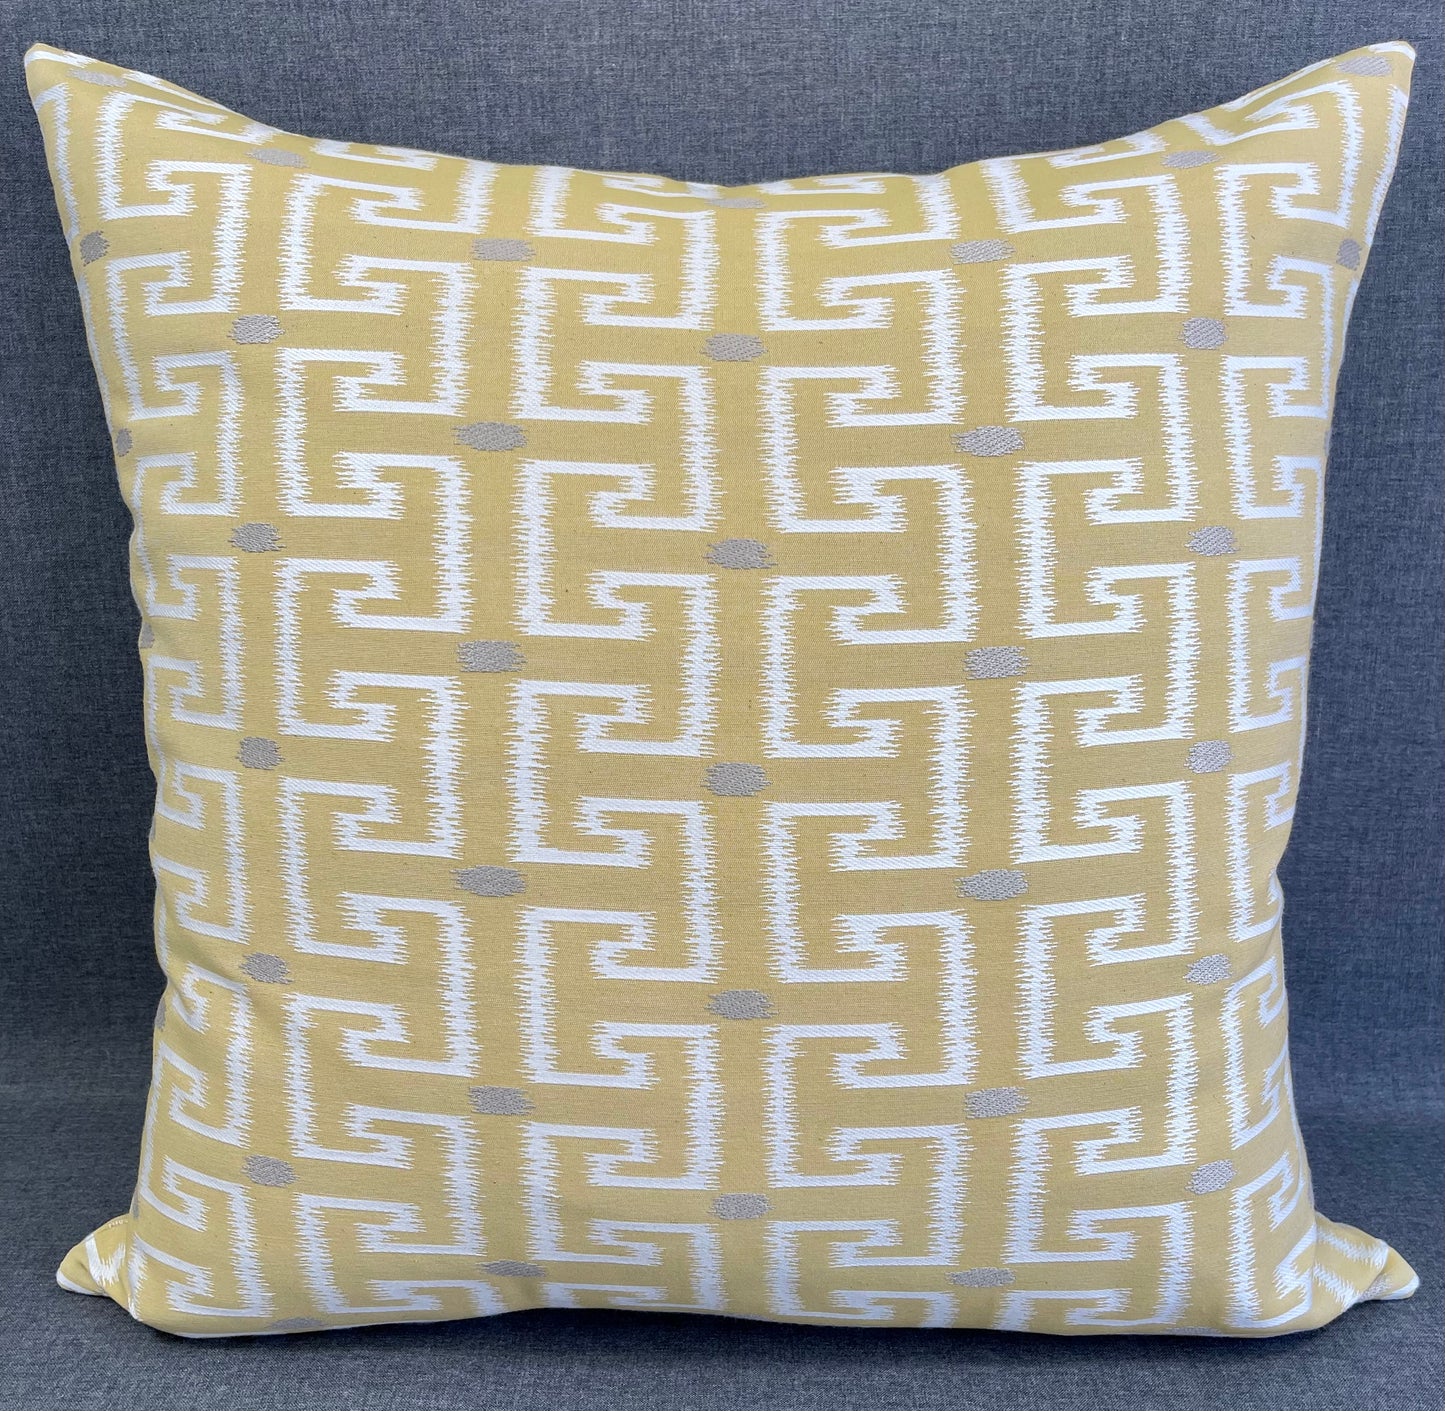 Luxury Pillow - 24" x 24" - Rachel Gold;  Beautifully embroidered in a golden yellow and white interlocking pattern with grey dots